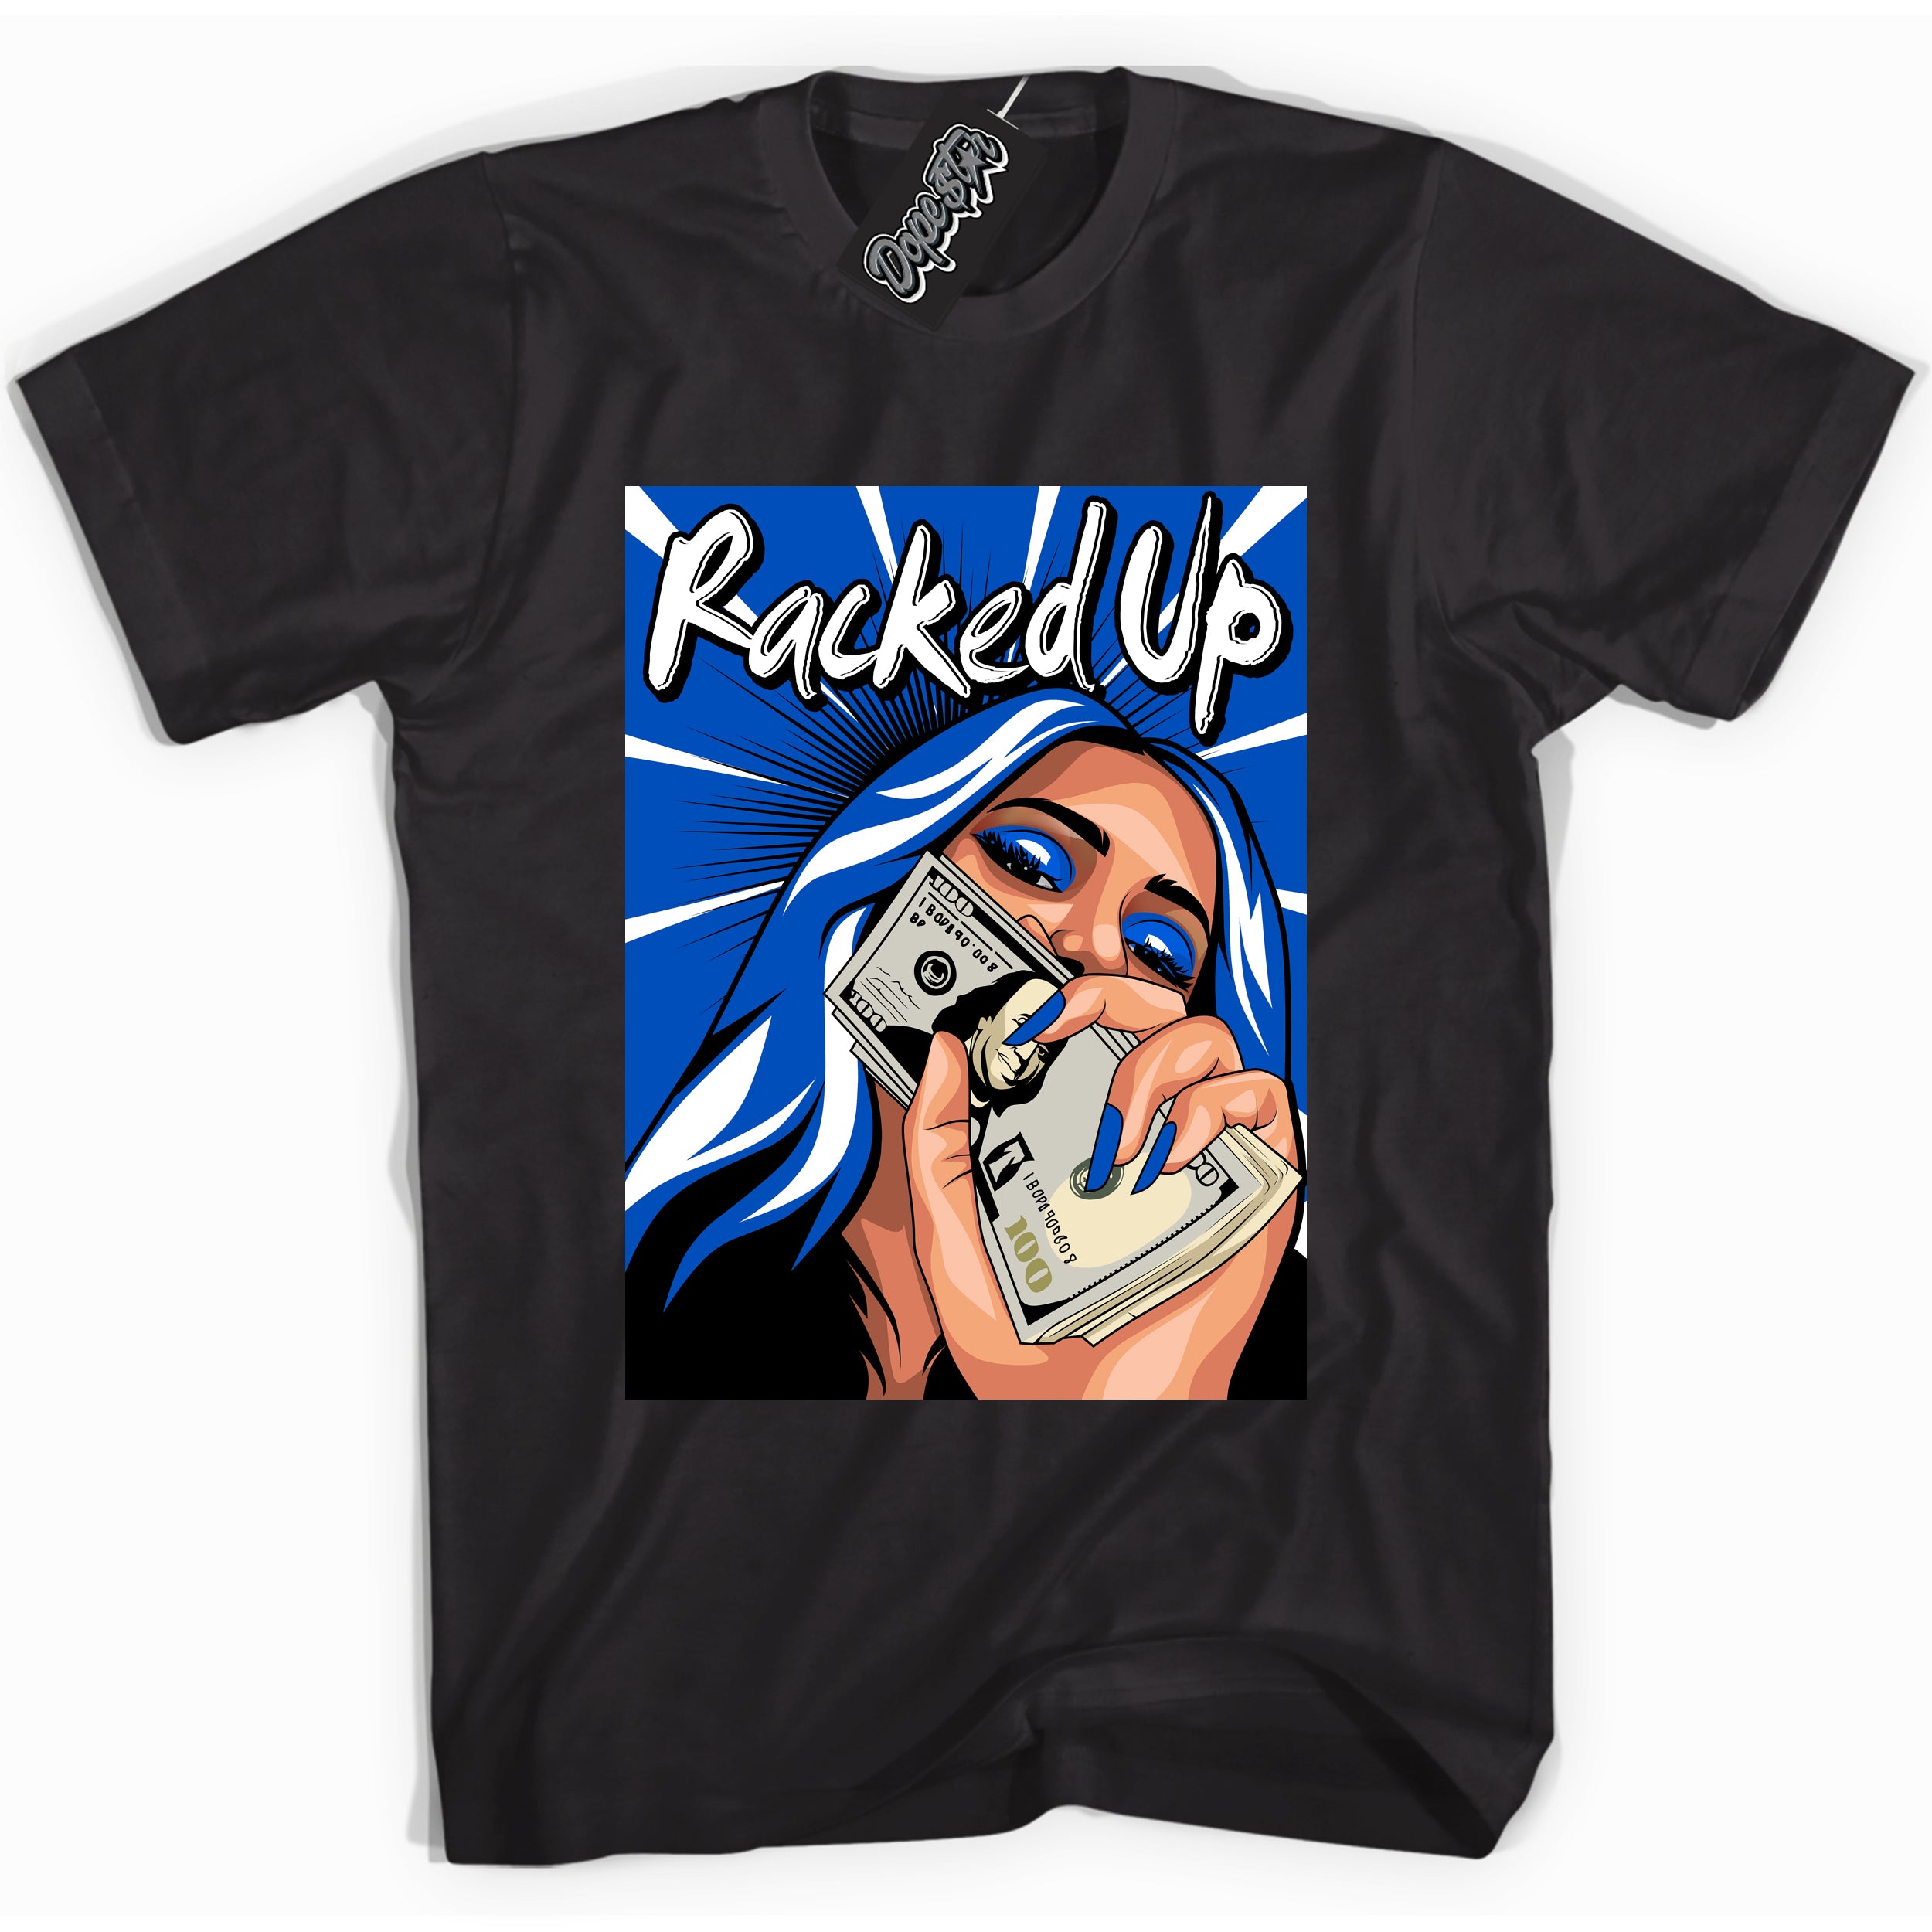 Cool Black graphic tee with "Racked Up" design, that perfectly matches Royal Reimagined 1s sneakers 